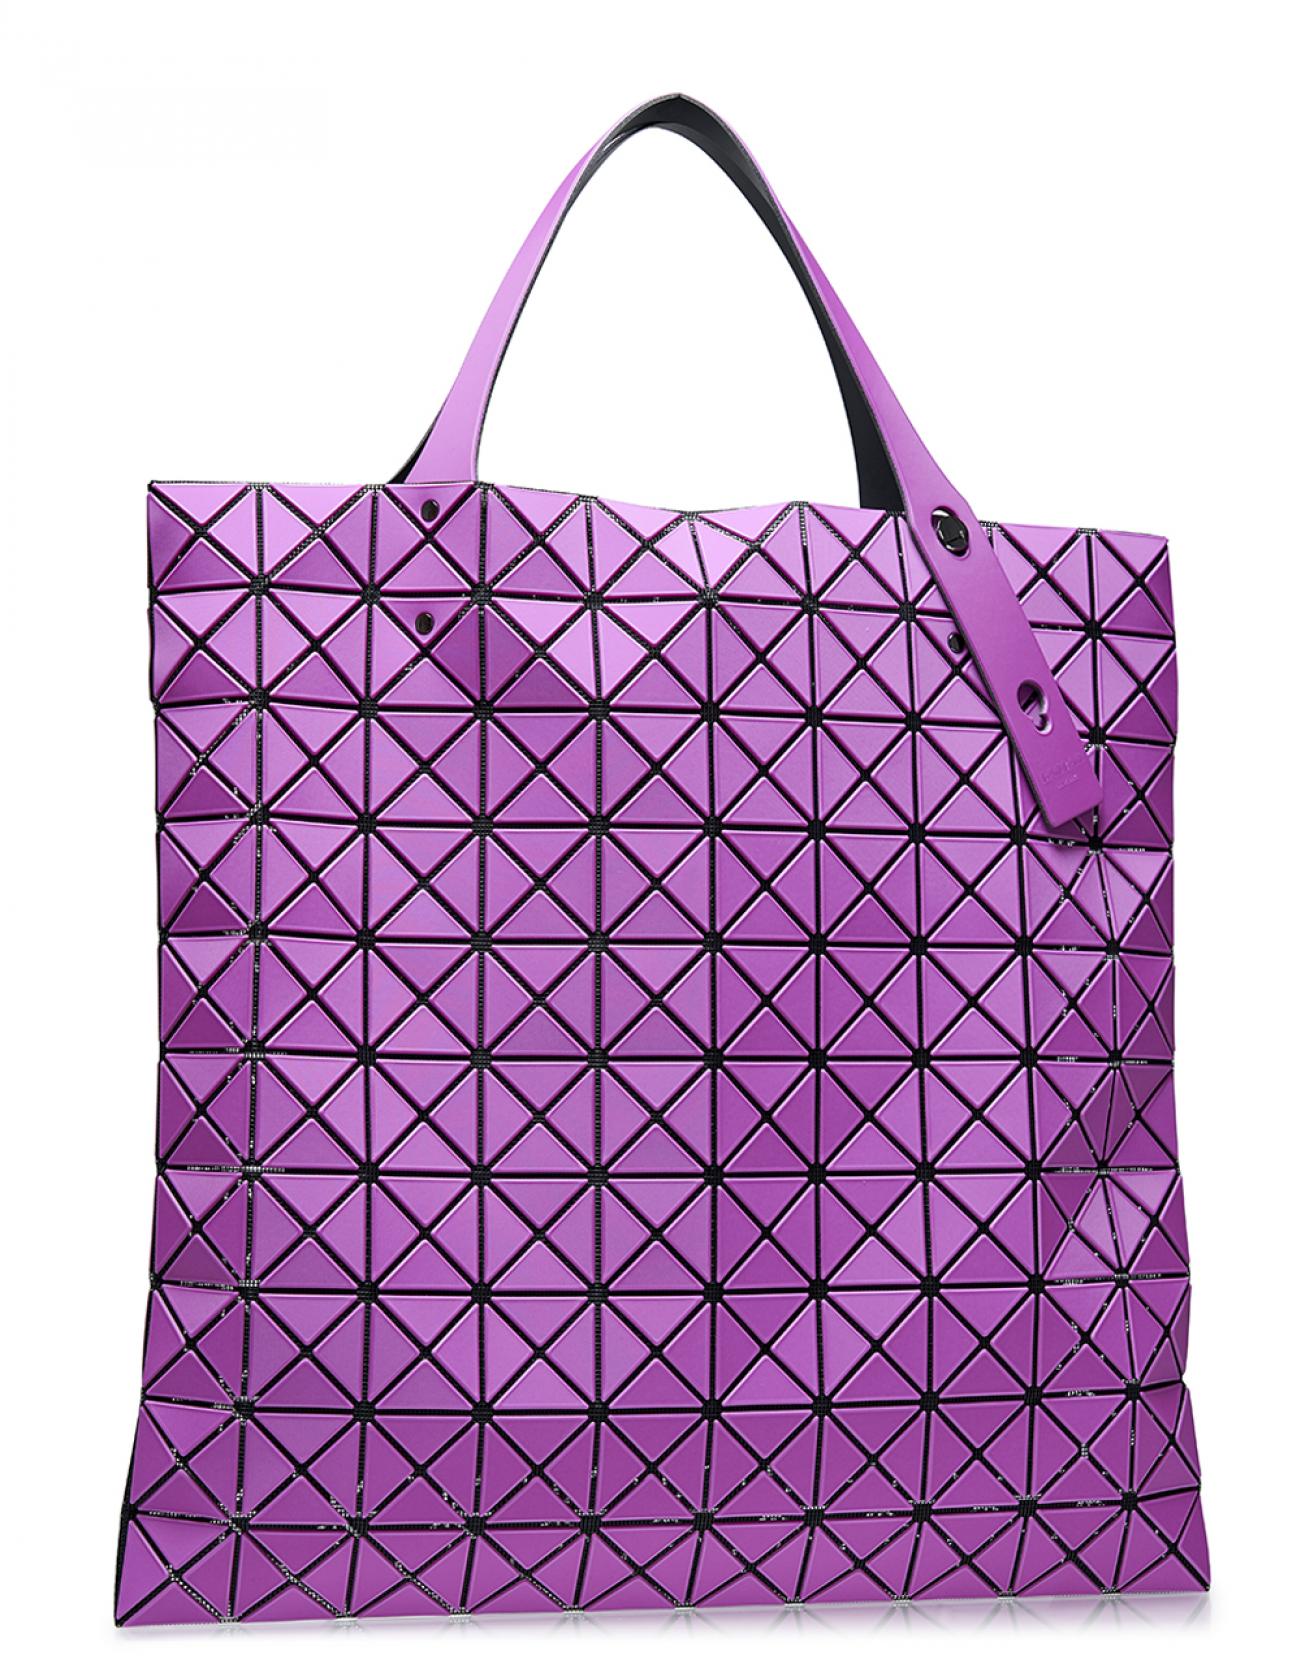 Bao-Bao-Issey-Miyake-Prism-Frost-Tote-10x10-Pink-2